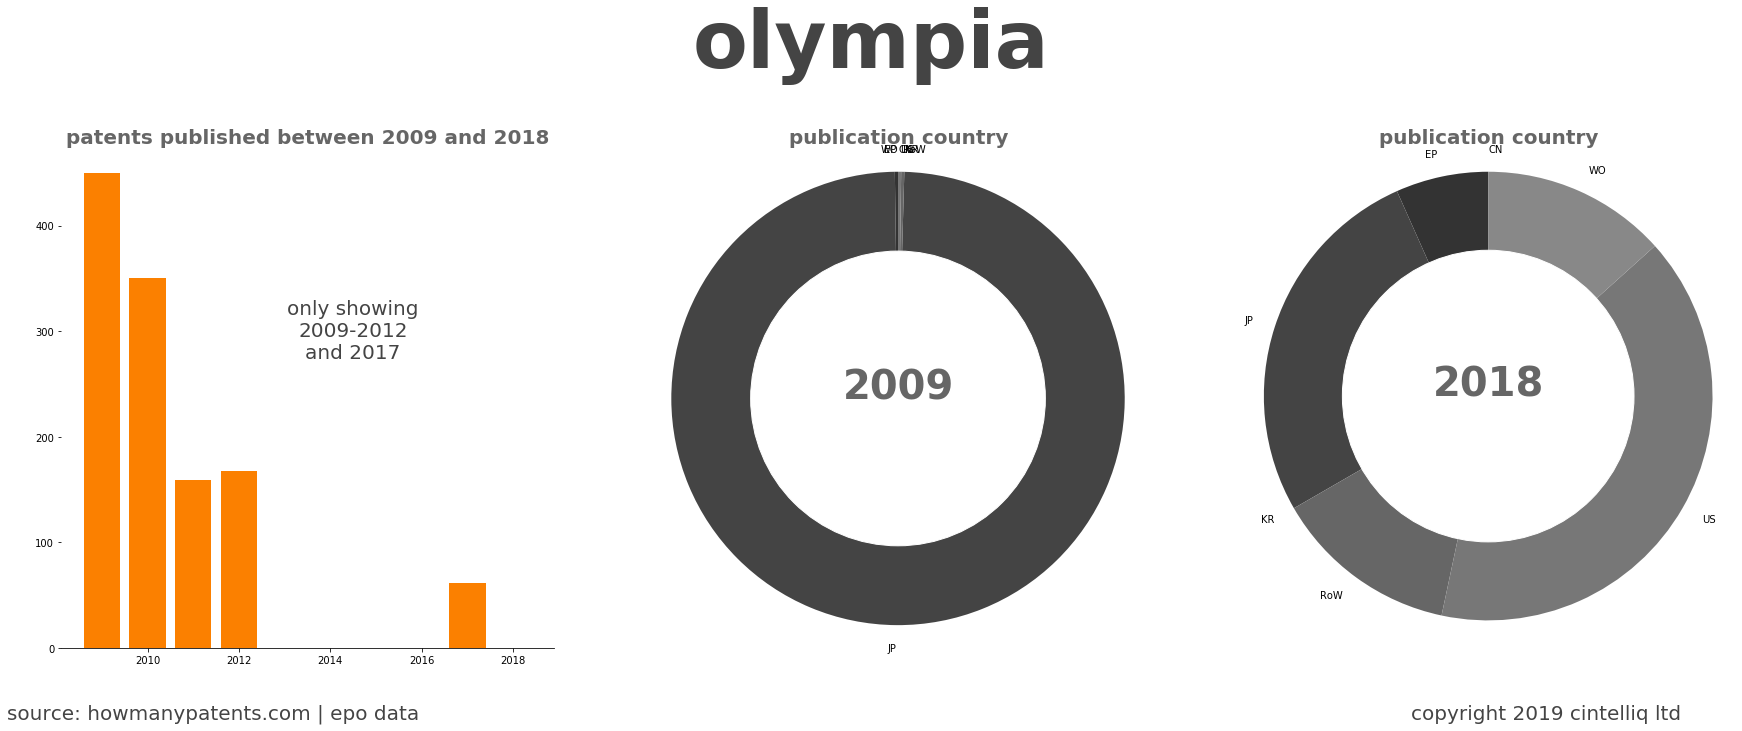 summary of patents for Olympia